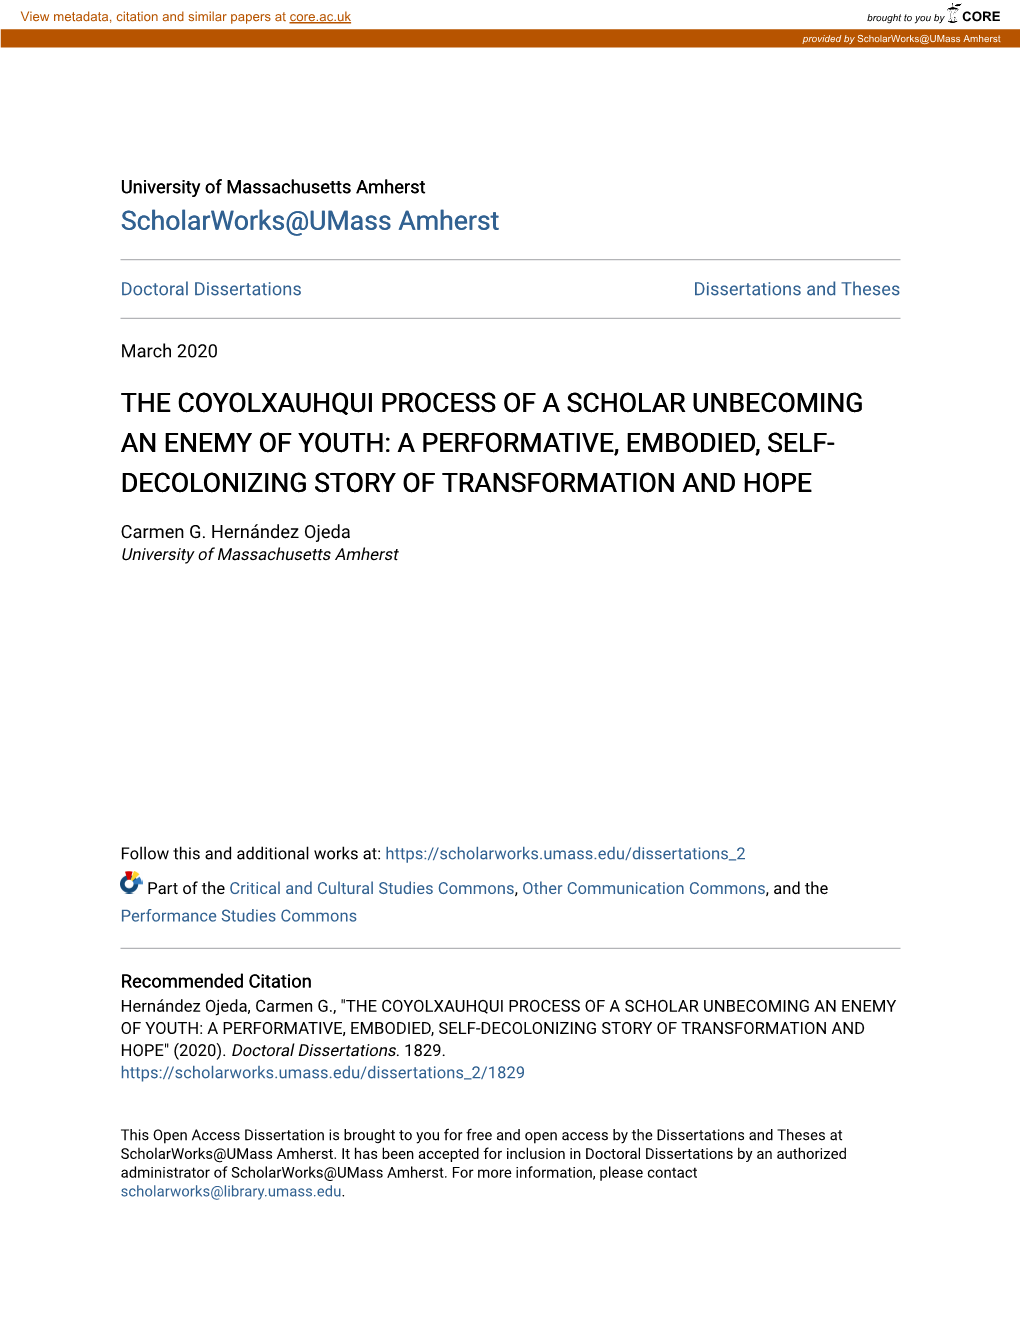 The Coyolxauhqui Process of a Scholar Unbecoming an Enemy of Youth: a Performative, Embodied, Self- Decolonizing Story of Transformation and Hope